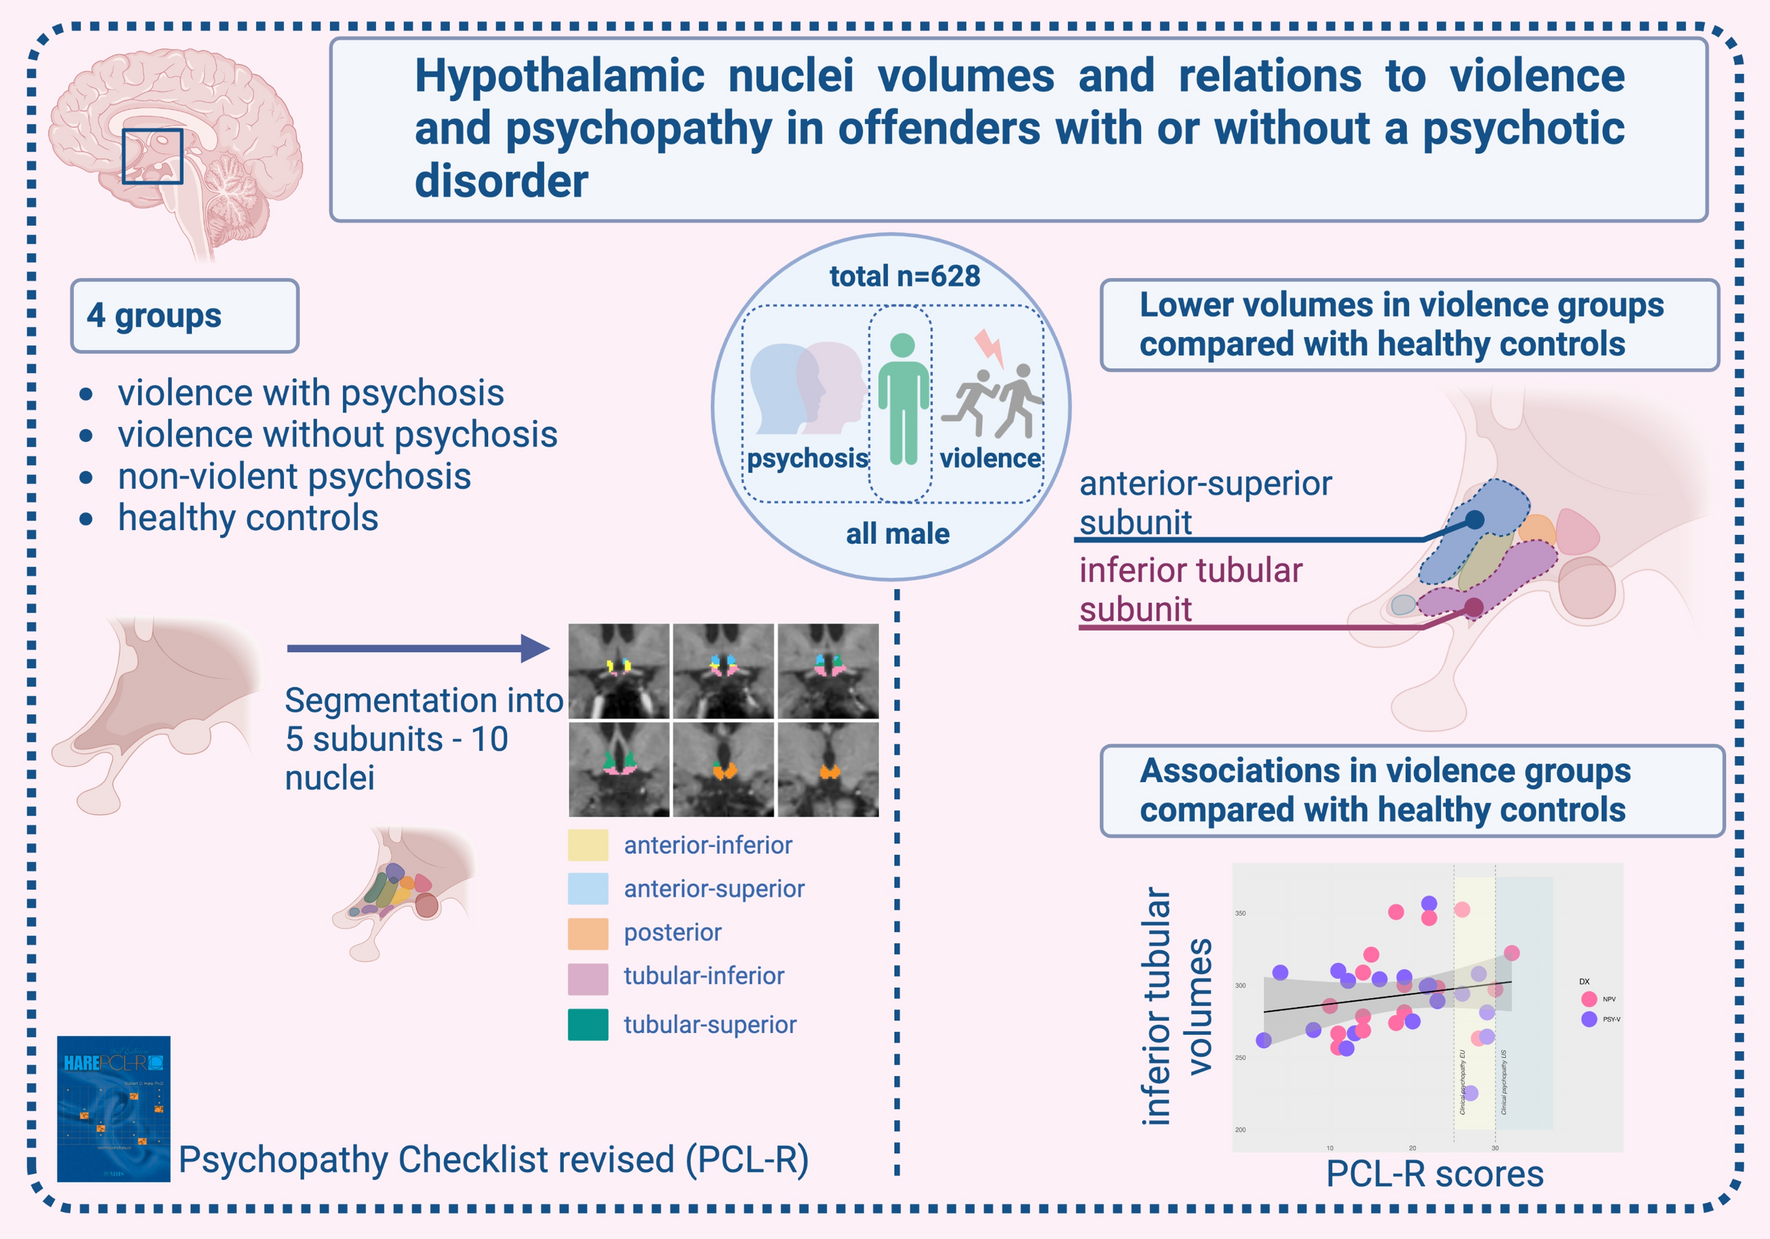 Hypothalamic subunit volumes and relations to violence and psychopathy in male offenders with or without a psychotic disorder